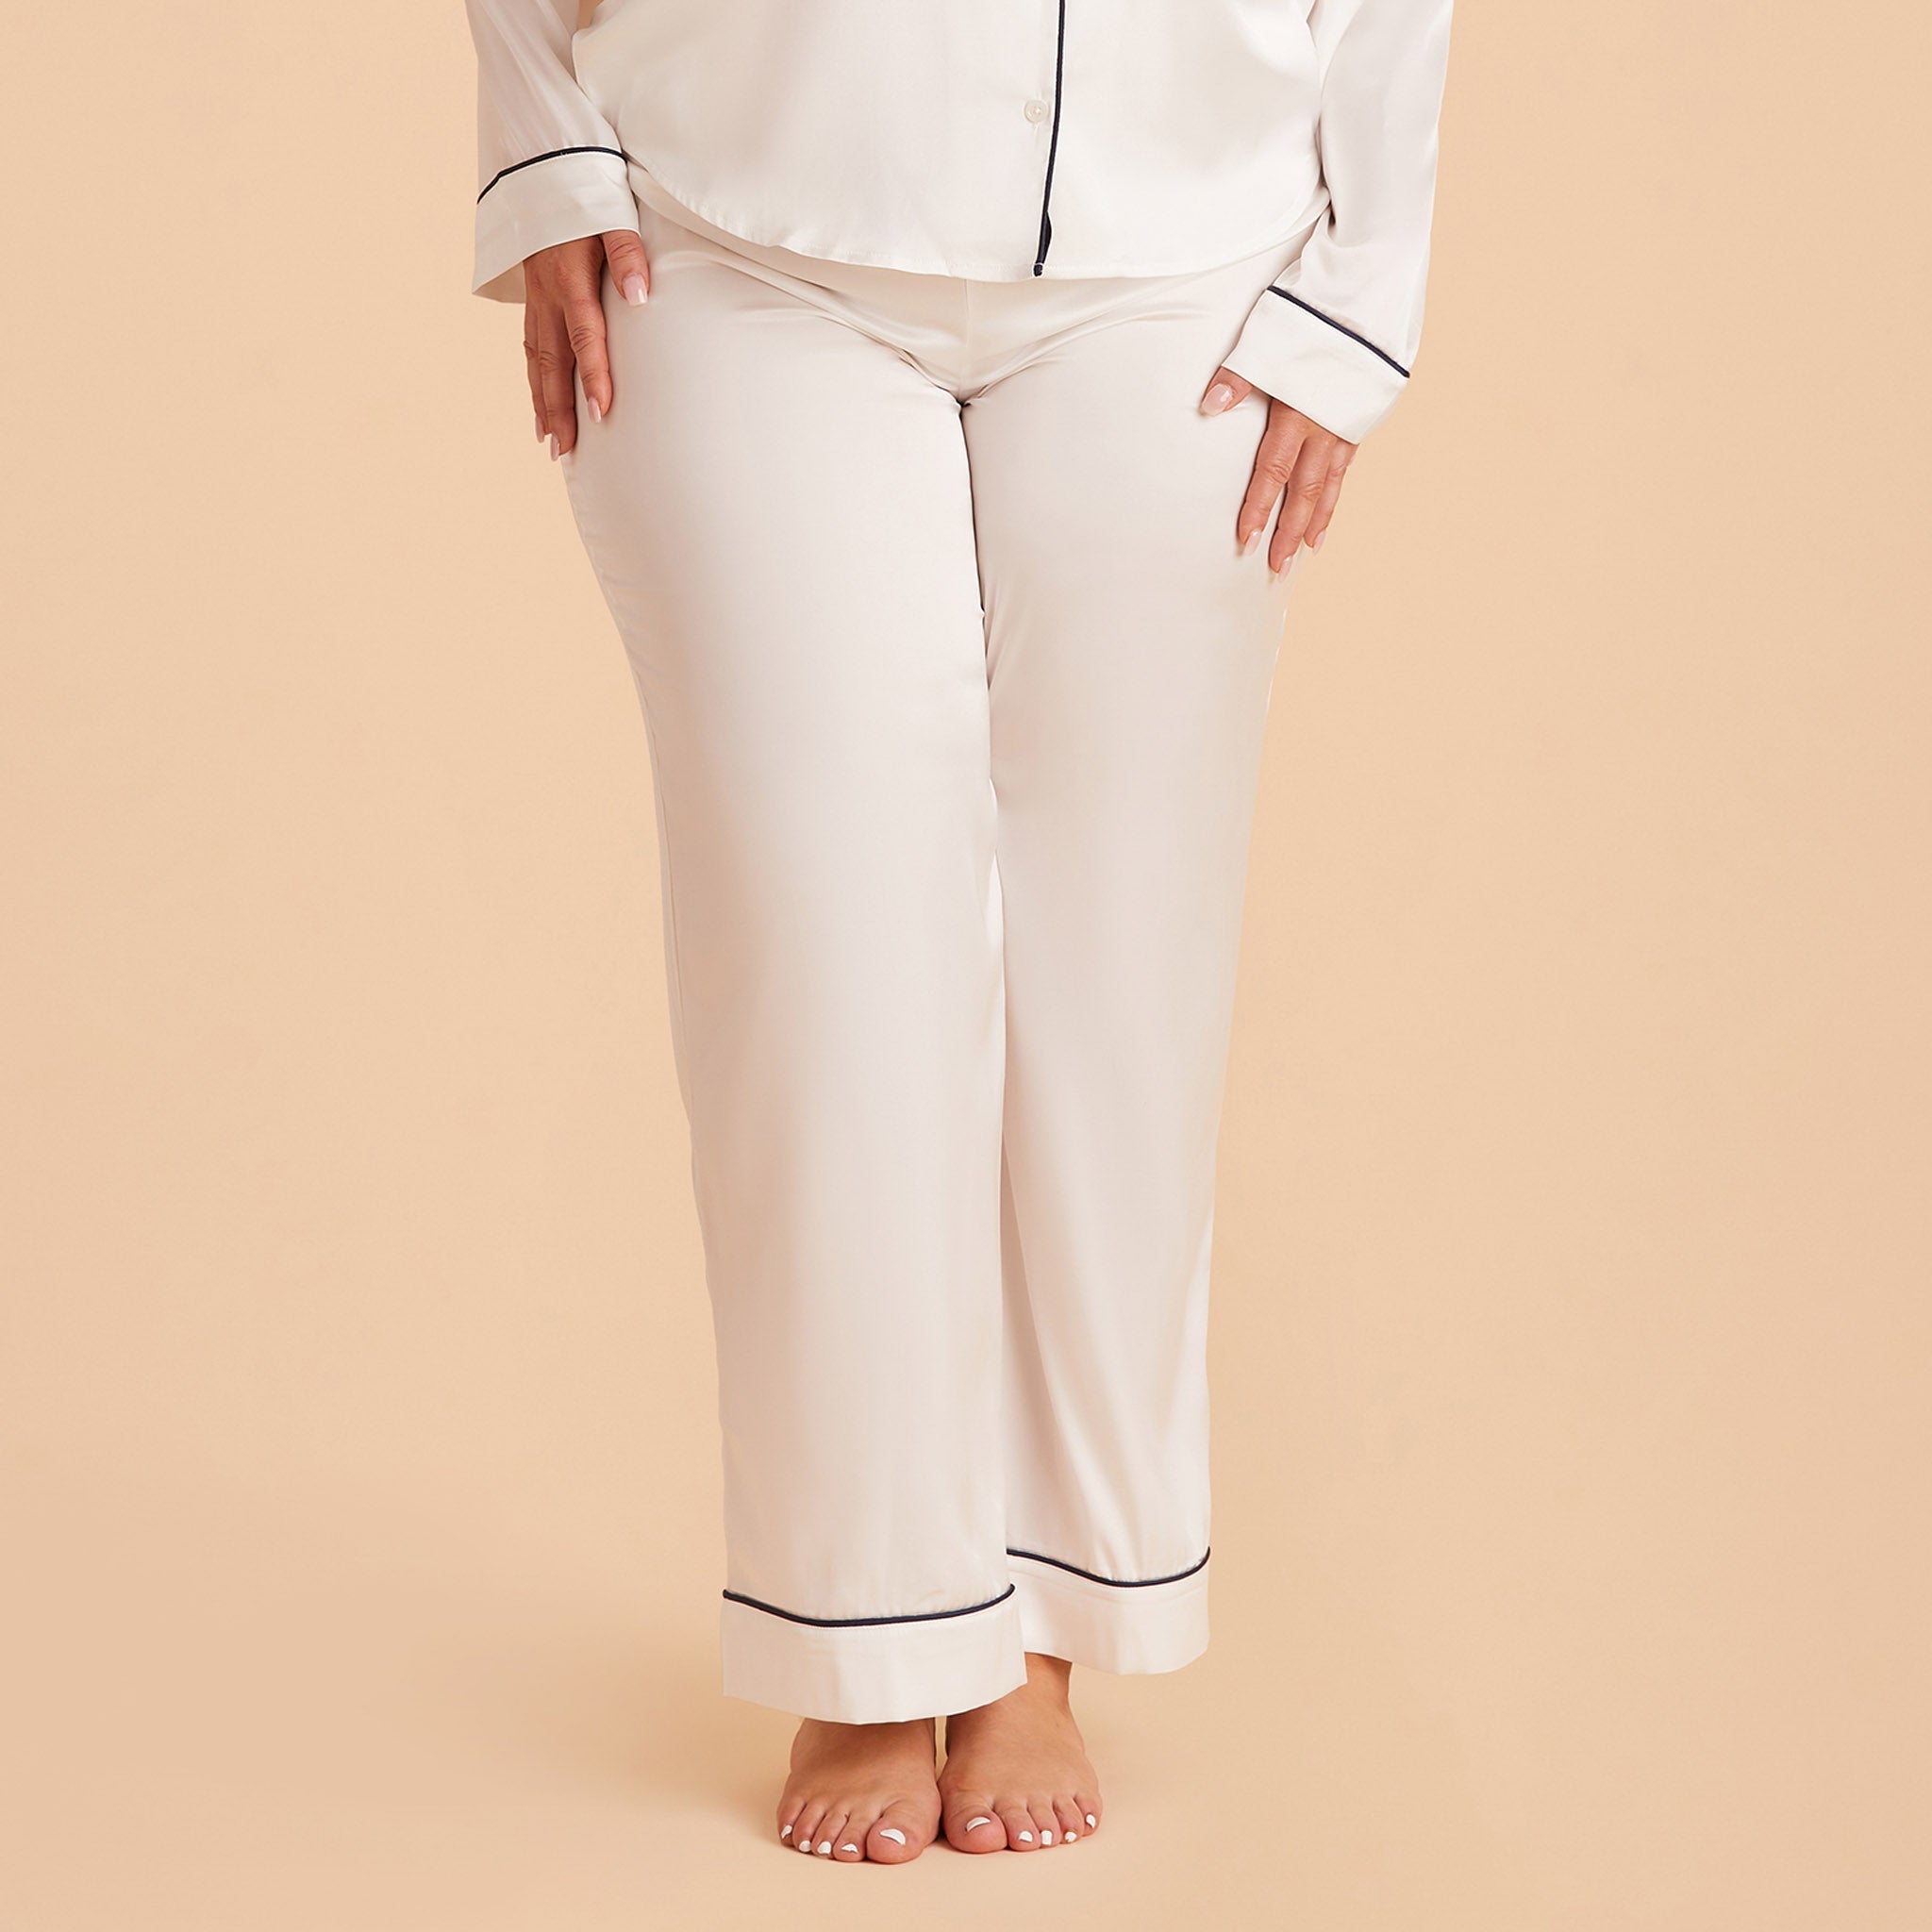 Jonny Plus Size Satin Pants Bridesmaid Pajamas With Navy Piping in Ivory, front view